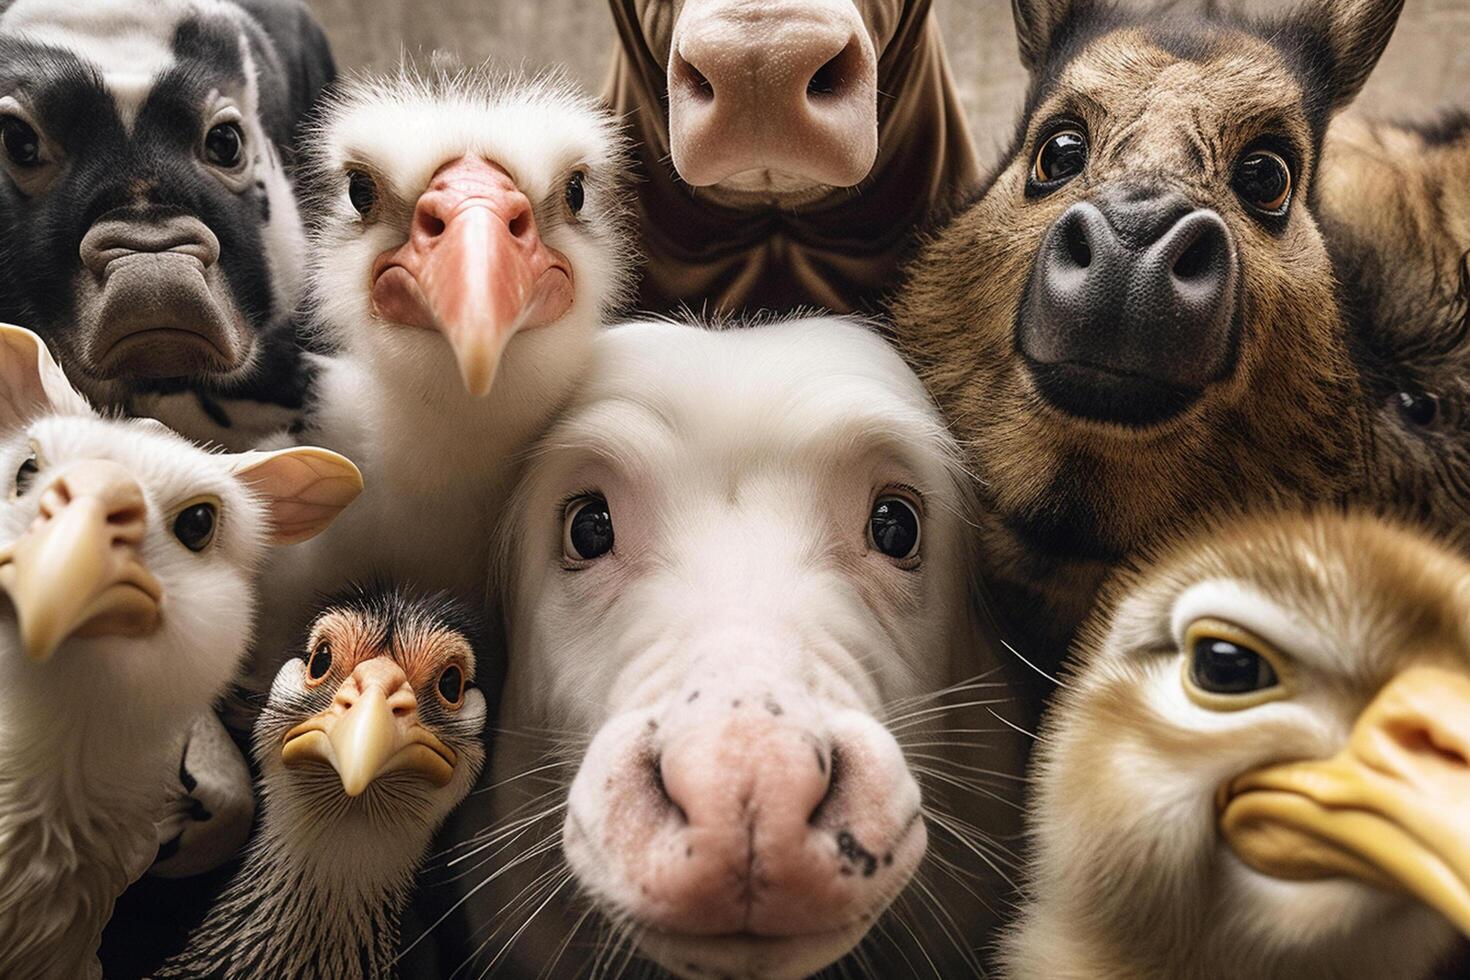 group of farm animals on a wooden background, top view, close-up photo